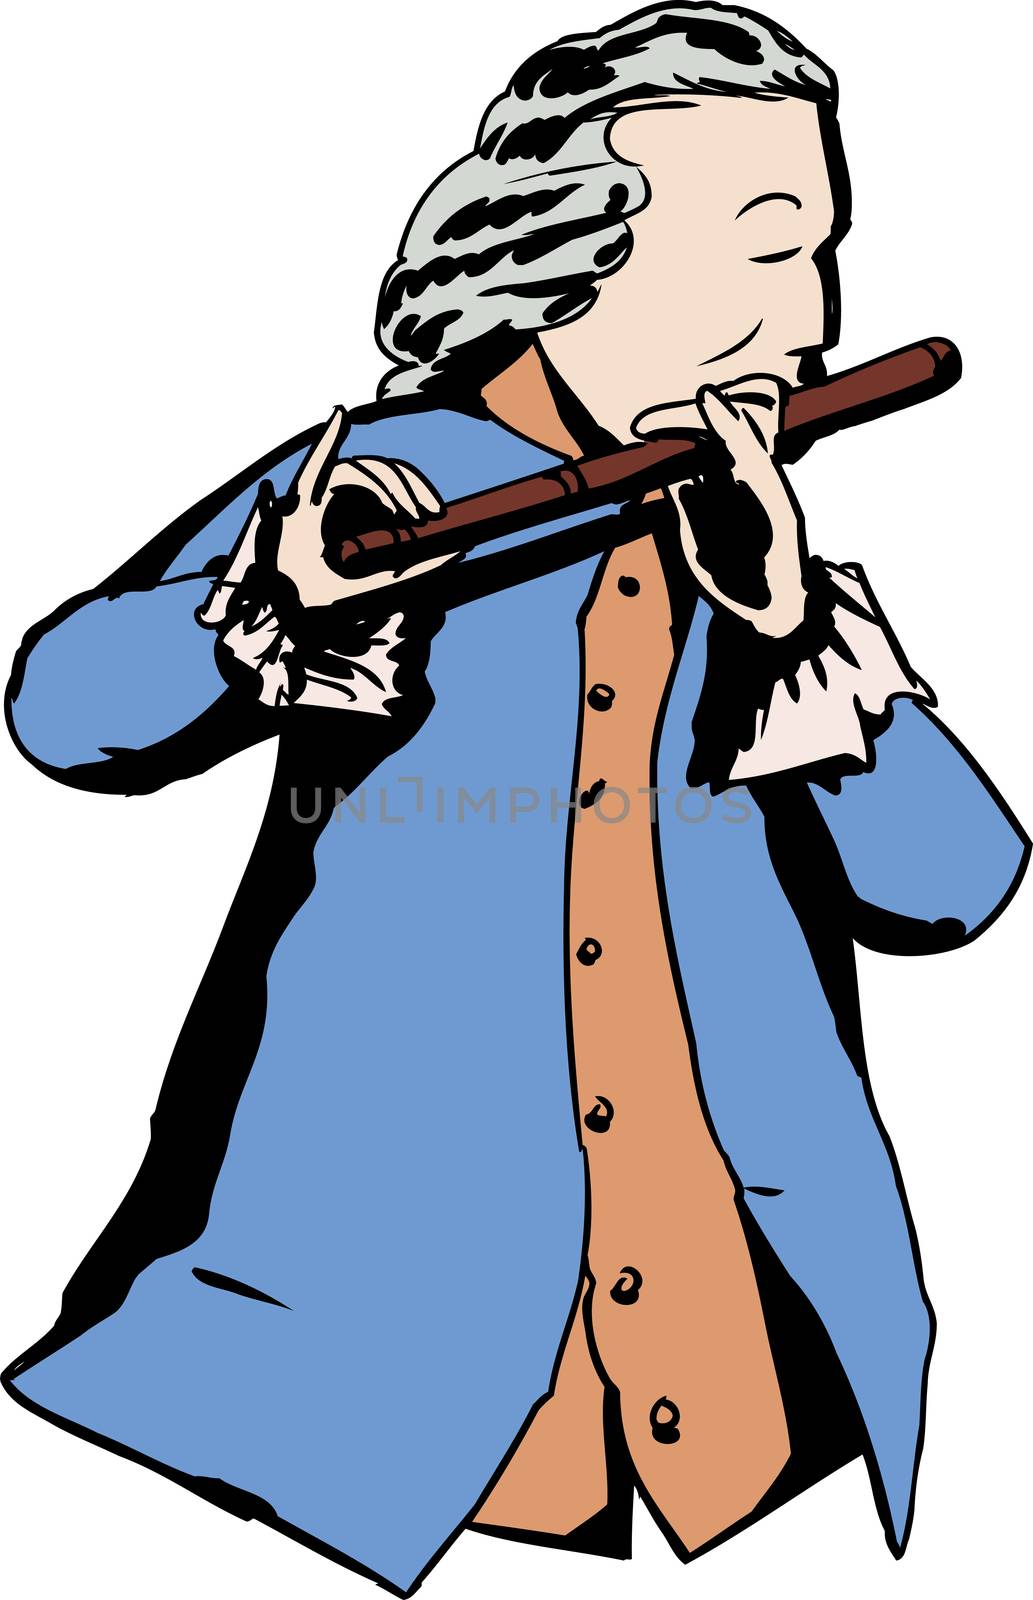 18th century man playing flute by TheBlackRhino